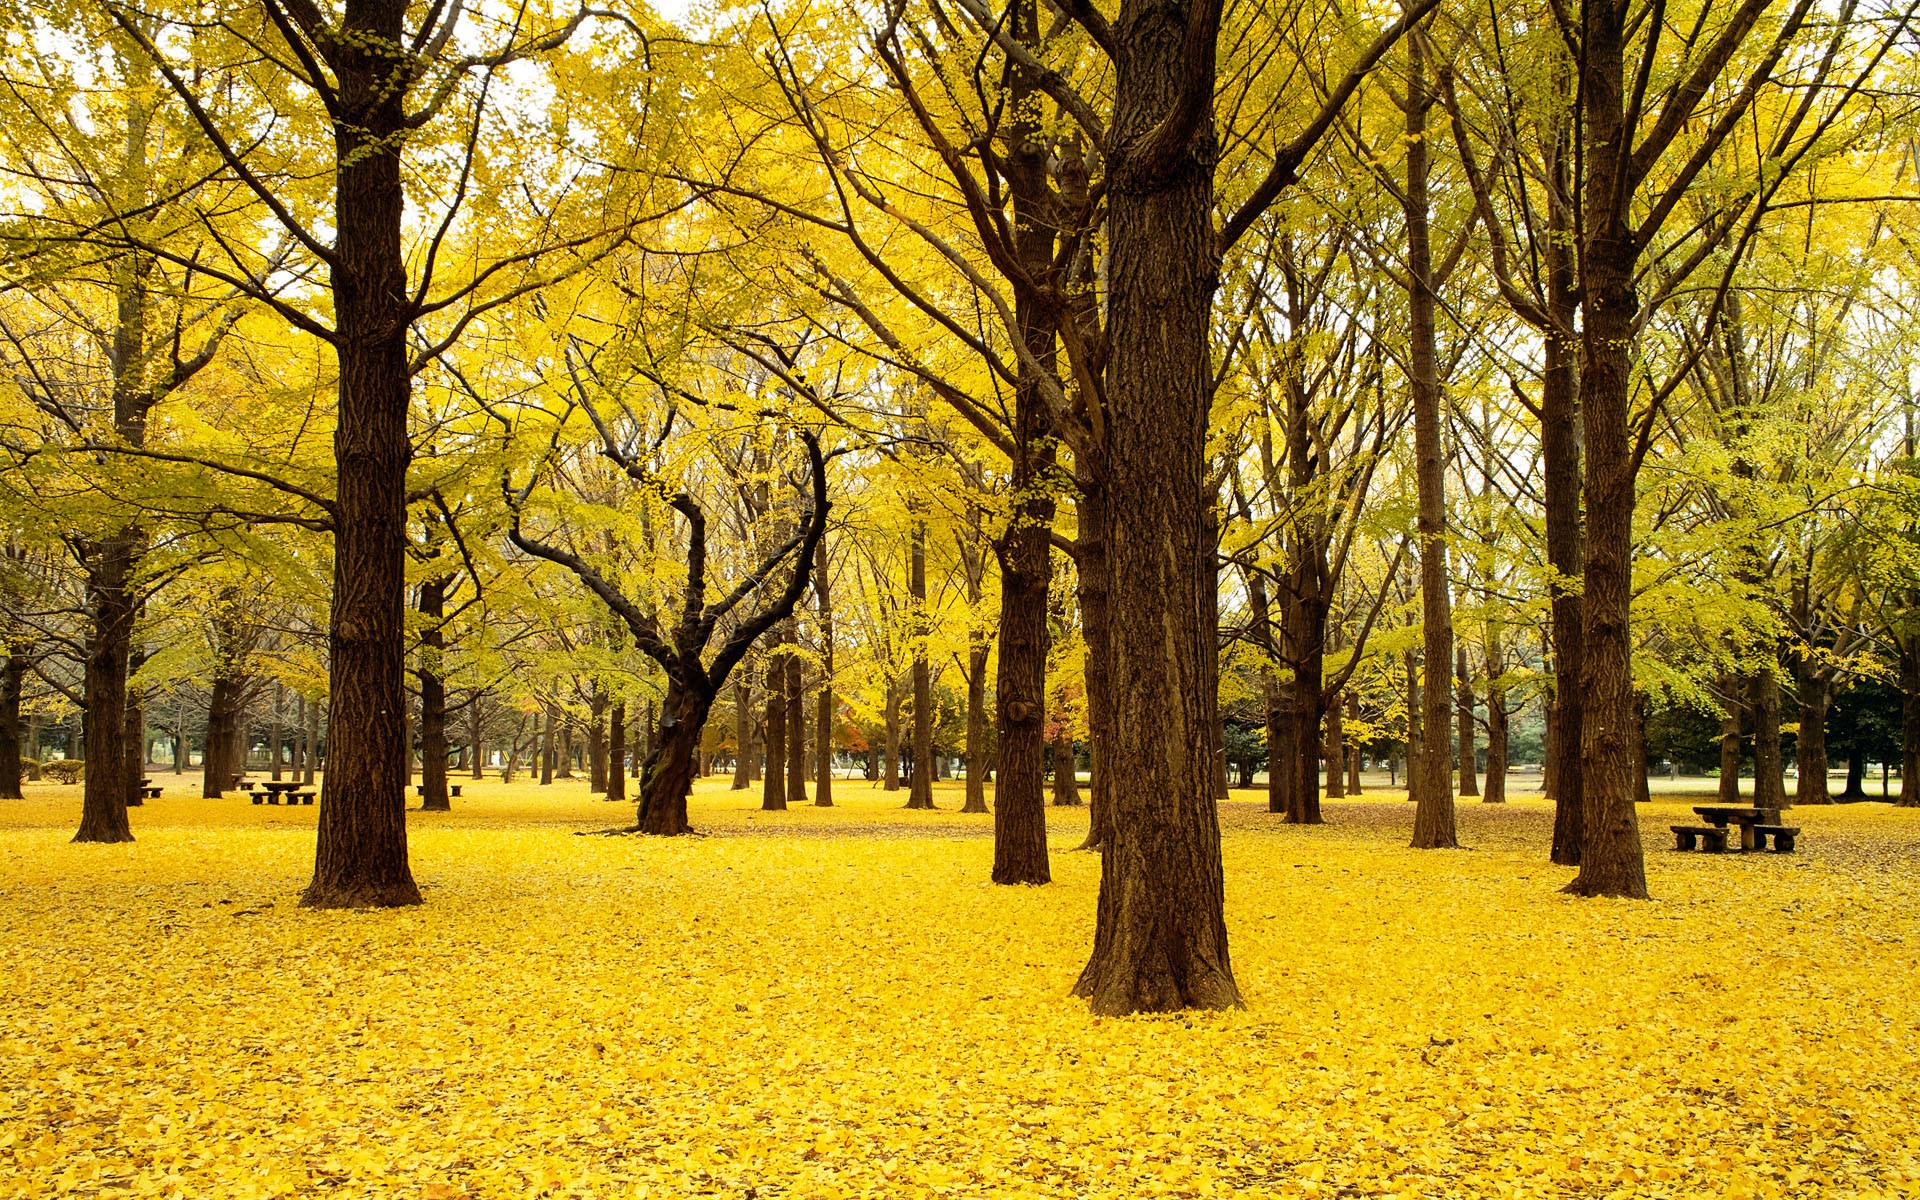 General 1920x1200 fall trees natural light yellow fallen leaves park